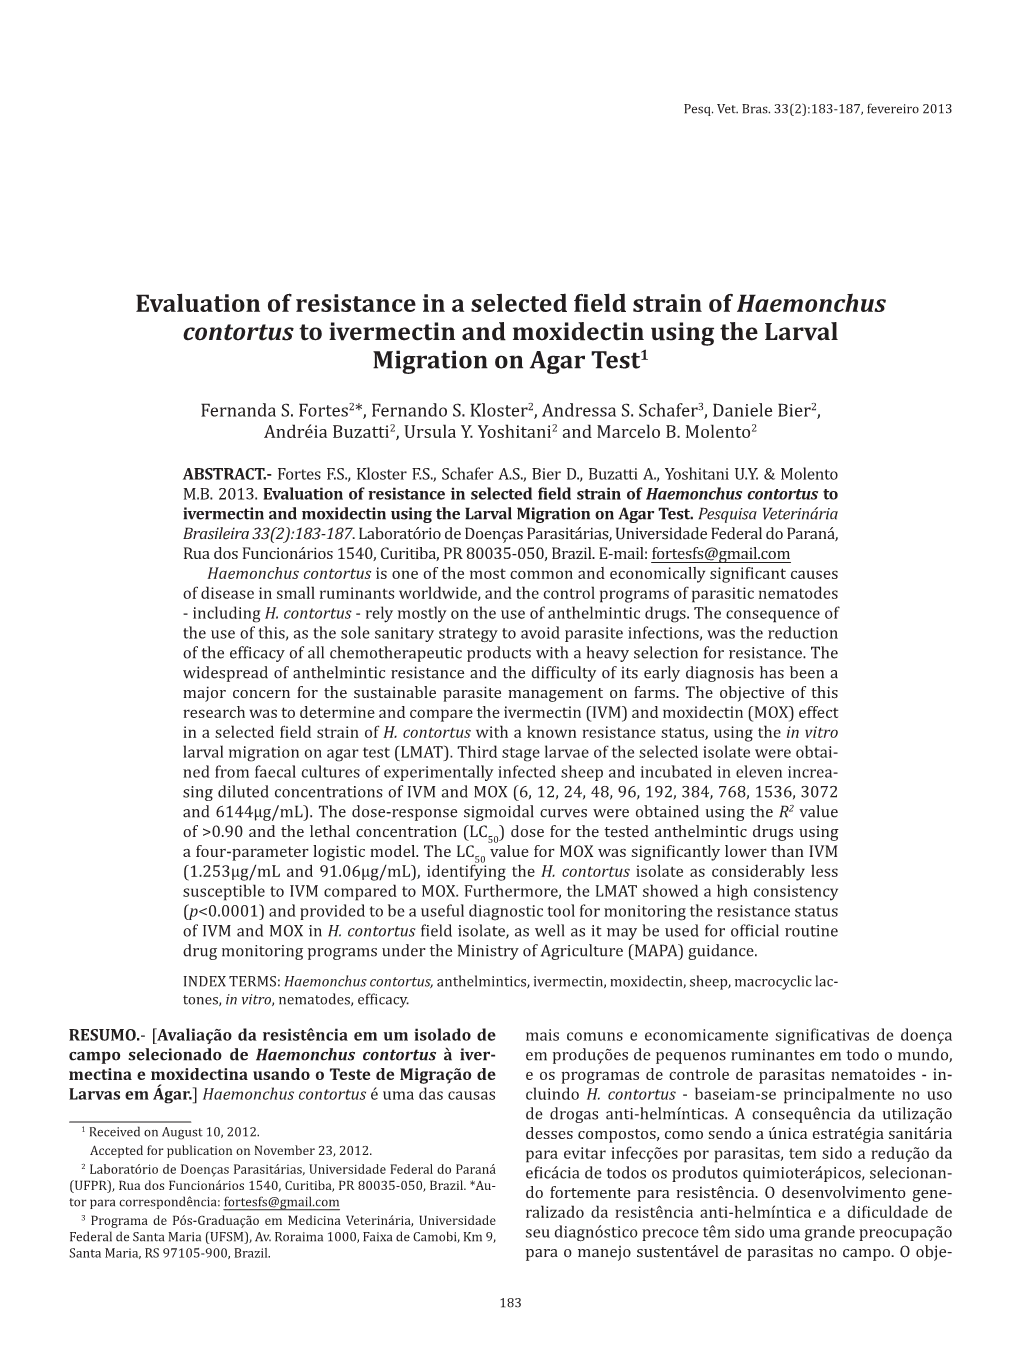 Evaluation of Resistance in a Selected Field Strain of Haemonchus Contortus to Ivermectin and Moxidectin Using the Larval Migration on Agar Test1